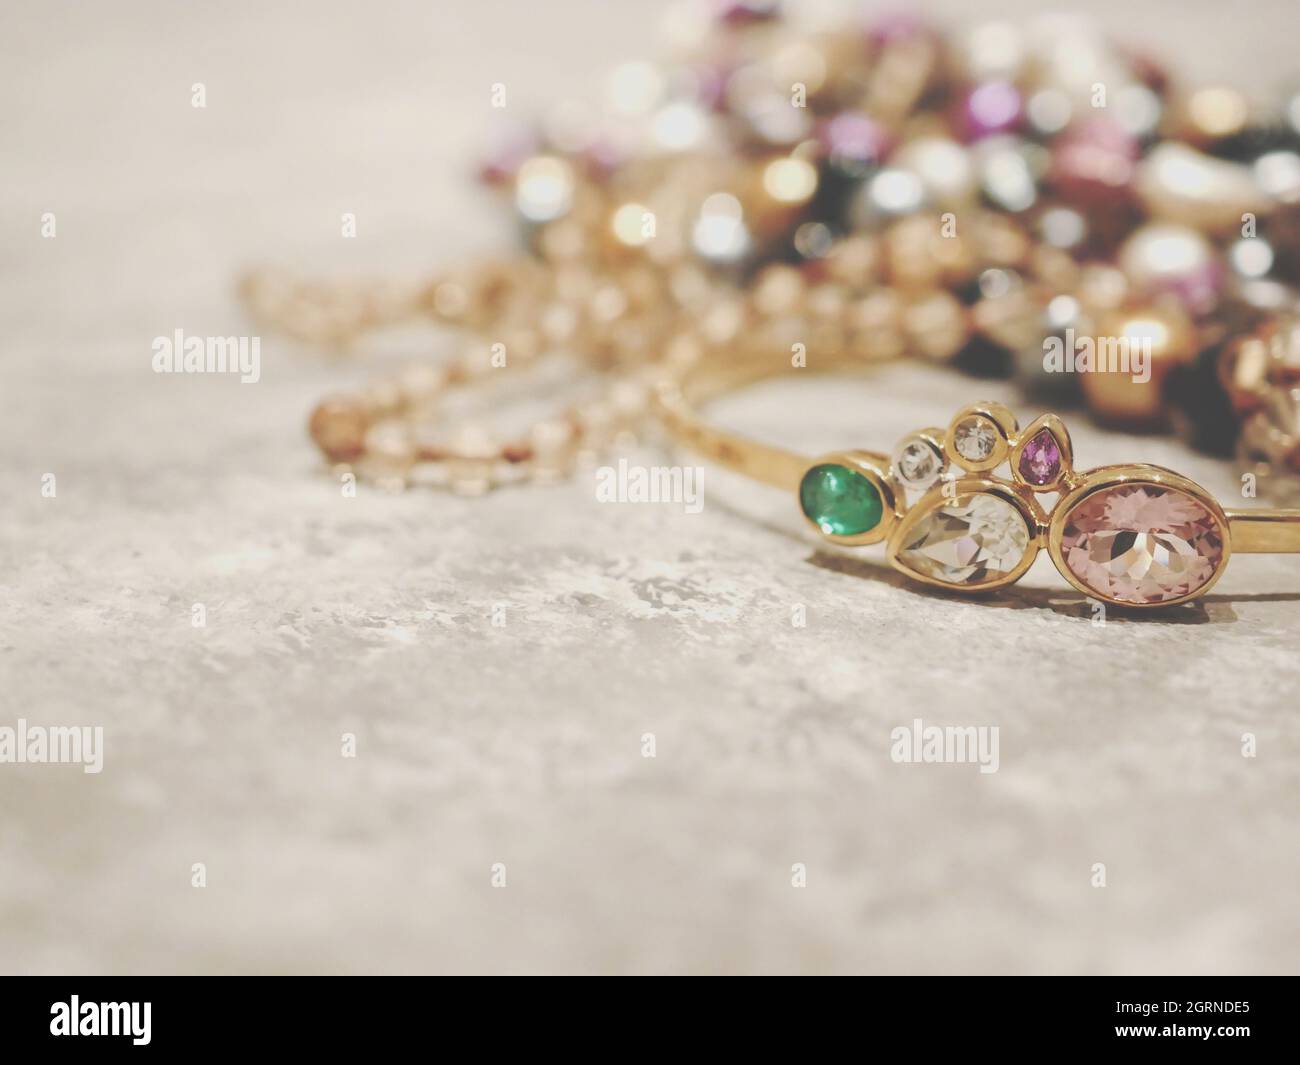 Close-up Of Jewelry On Table Stock Photo